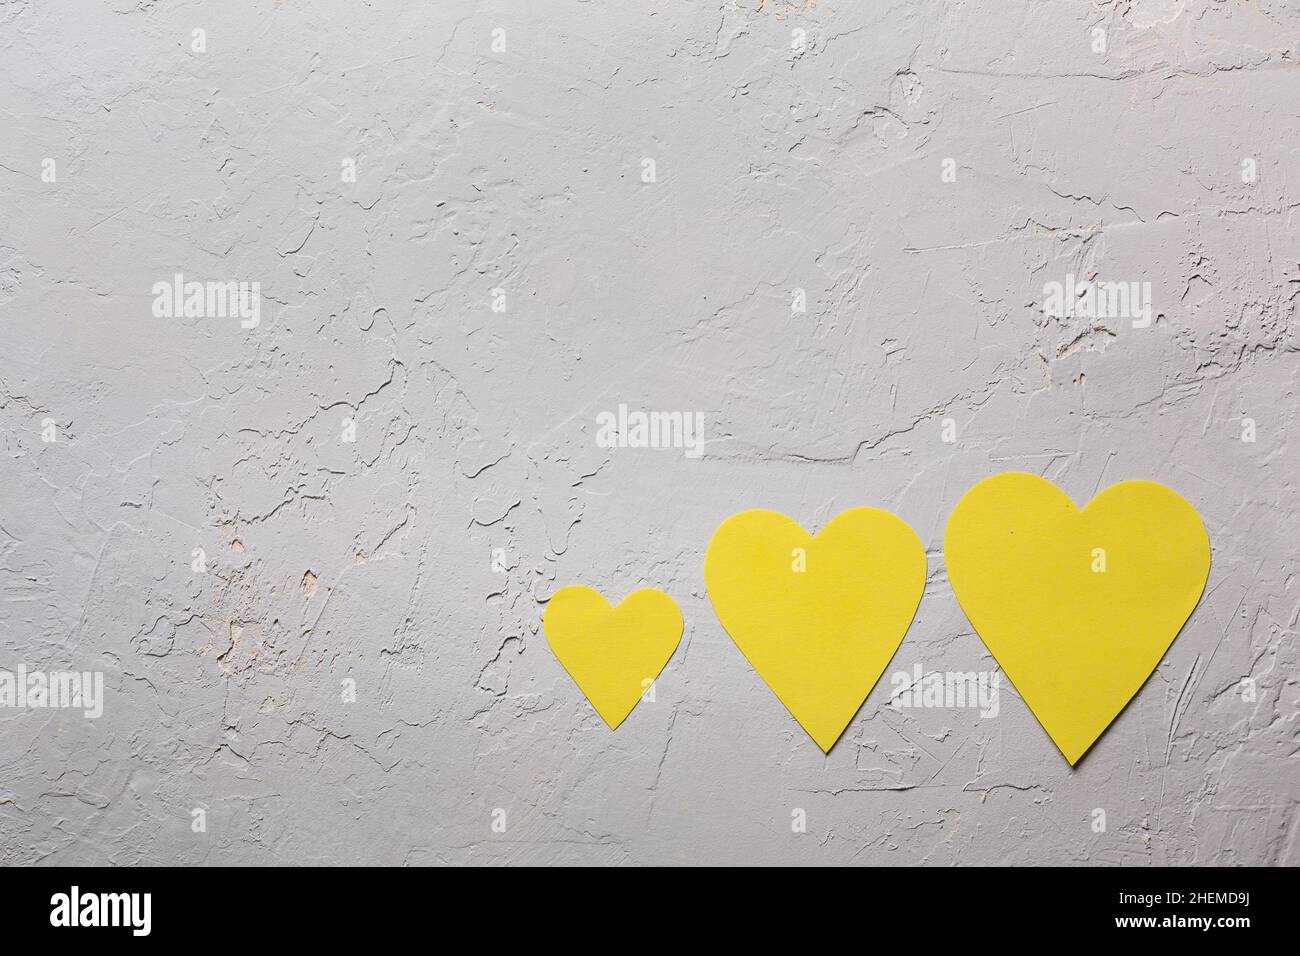 Saint Valentine day minimalistic greeting card in ultimate grey and illuminate yellow colors of the 2021 year, three paper hearts on textured backgrou Stock Photo